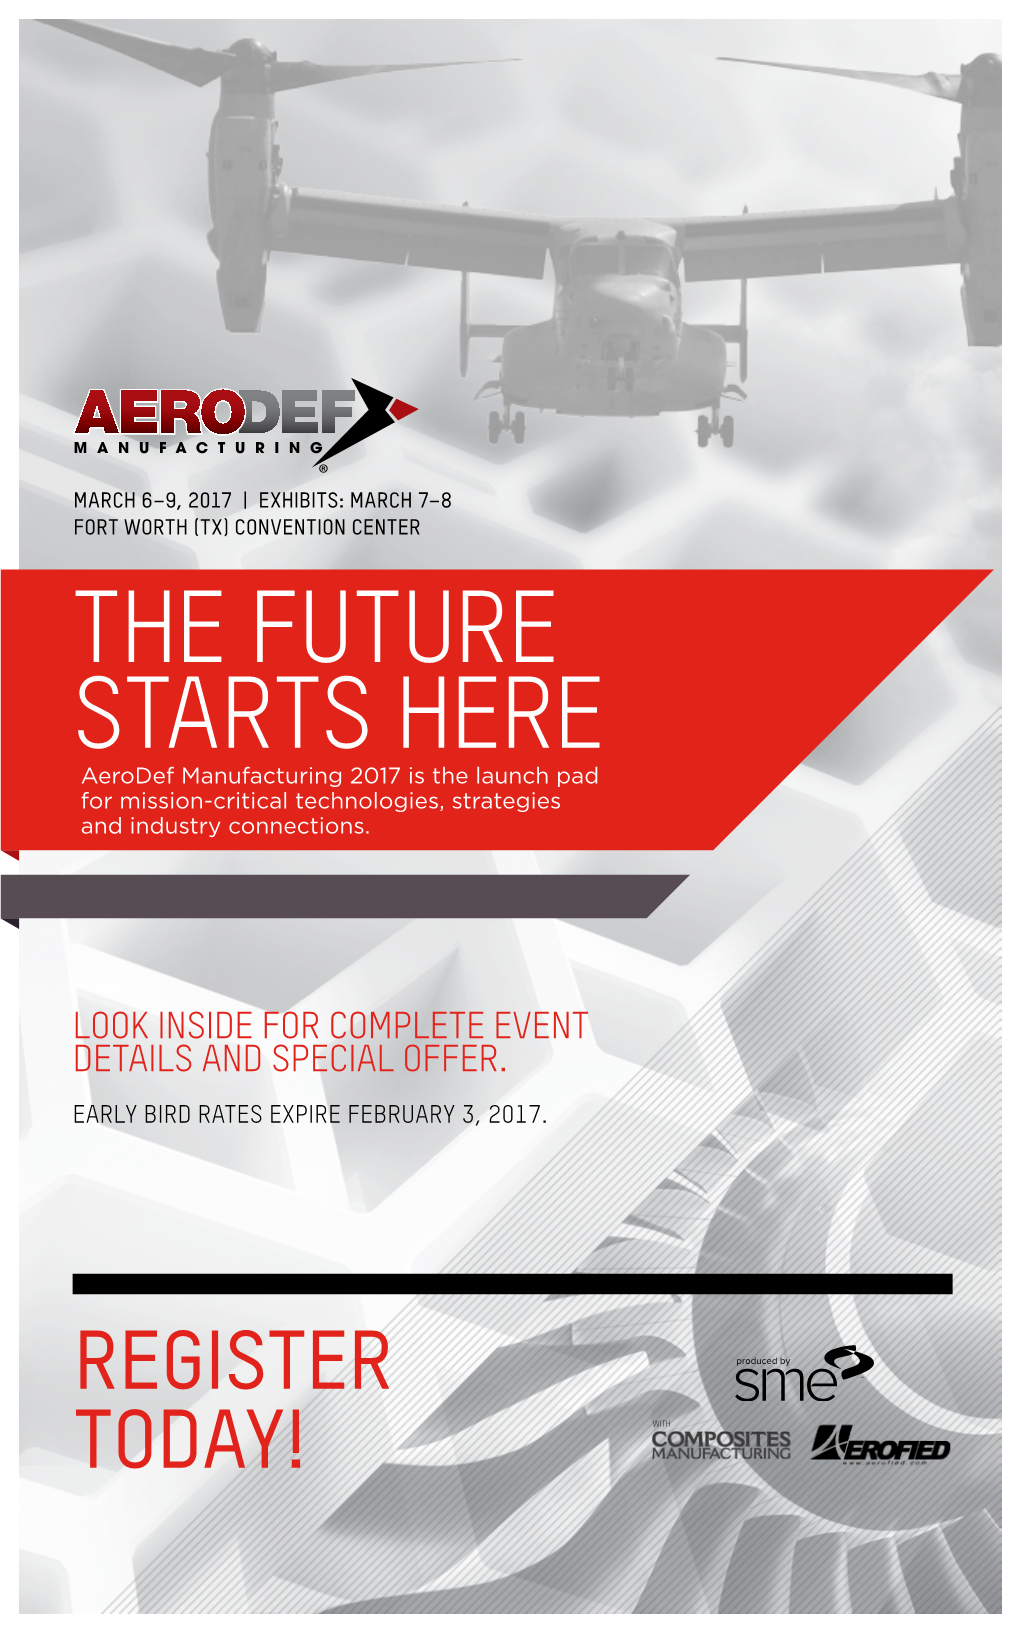 THE FUTURE STARTS HERE Aerodef Manufacturing 2017 Is the Launch Pad for Mission-Critical Technologies, Strategies and Industry Connections